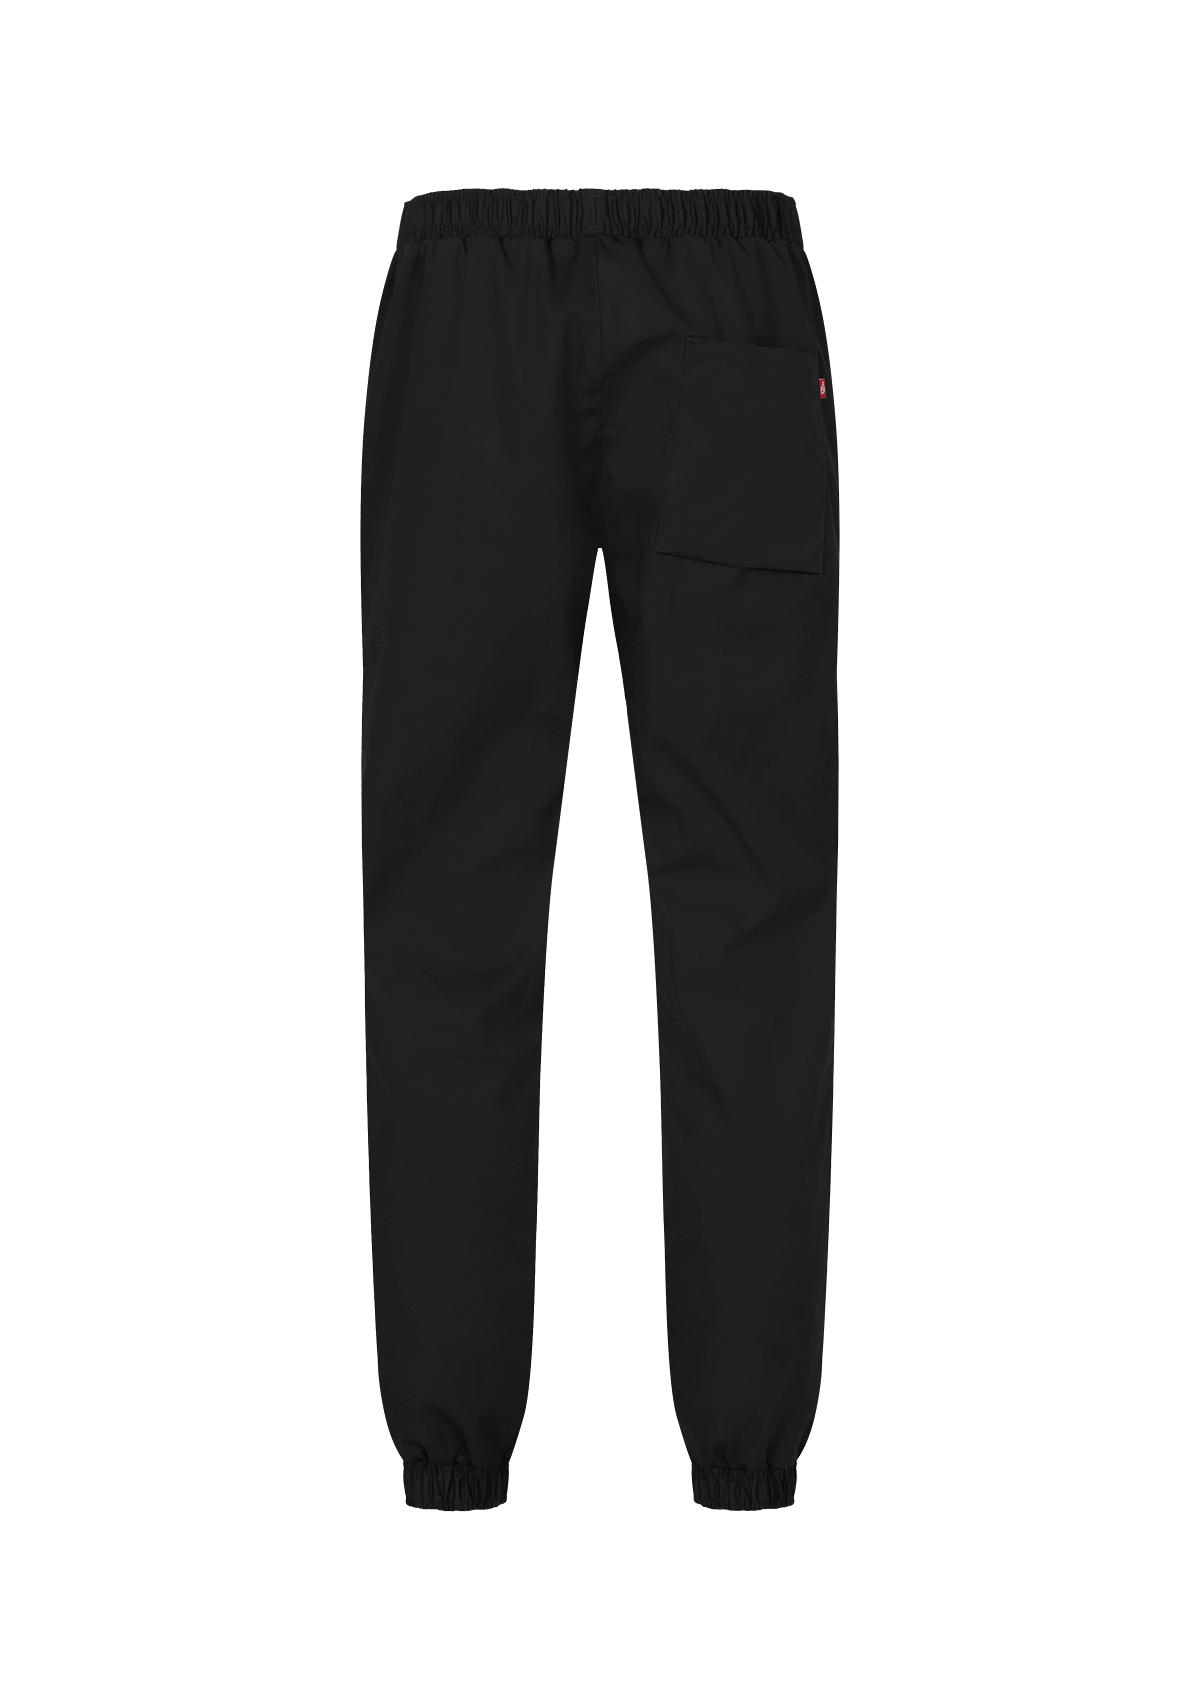 Unisex Trousers in a Relaxed Fit